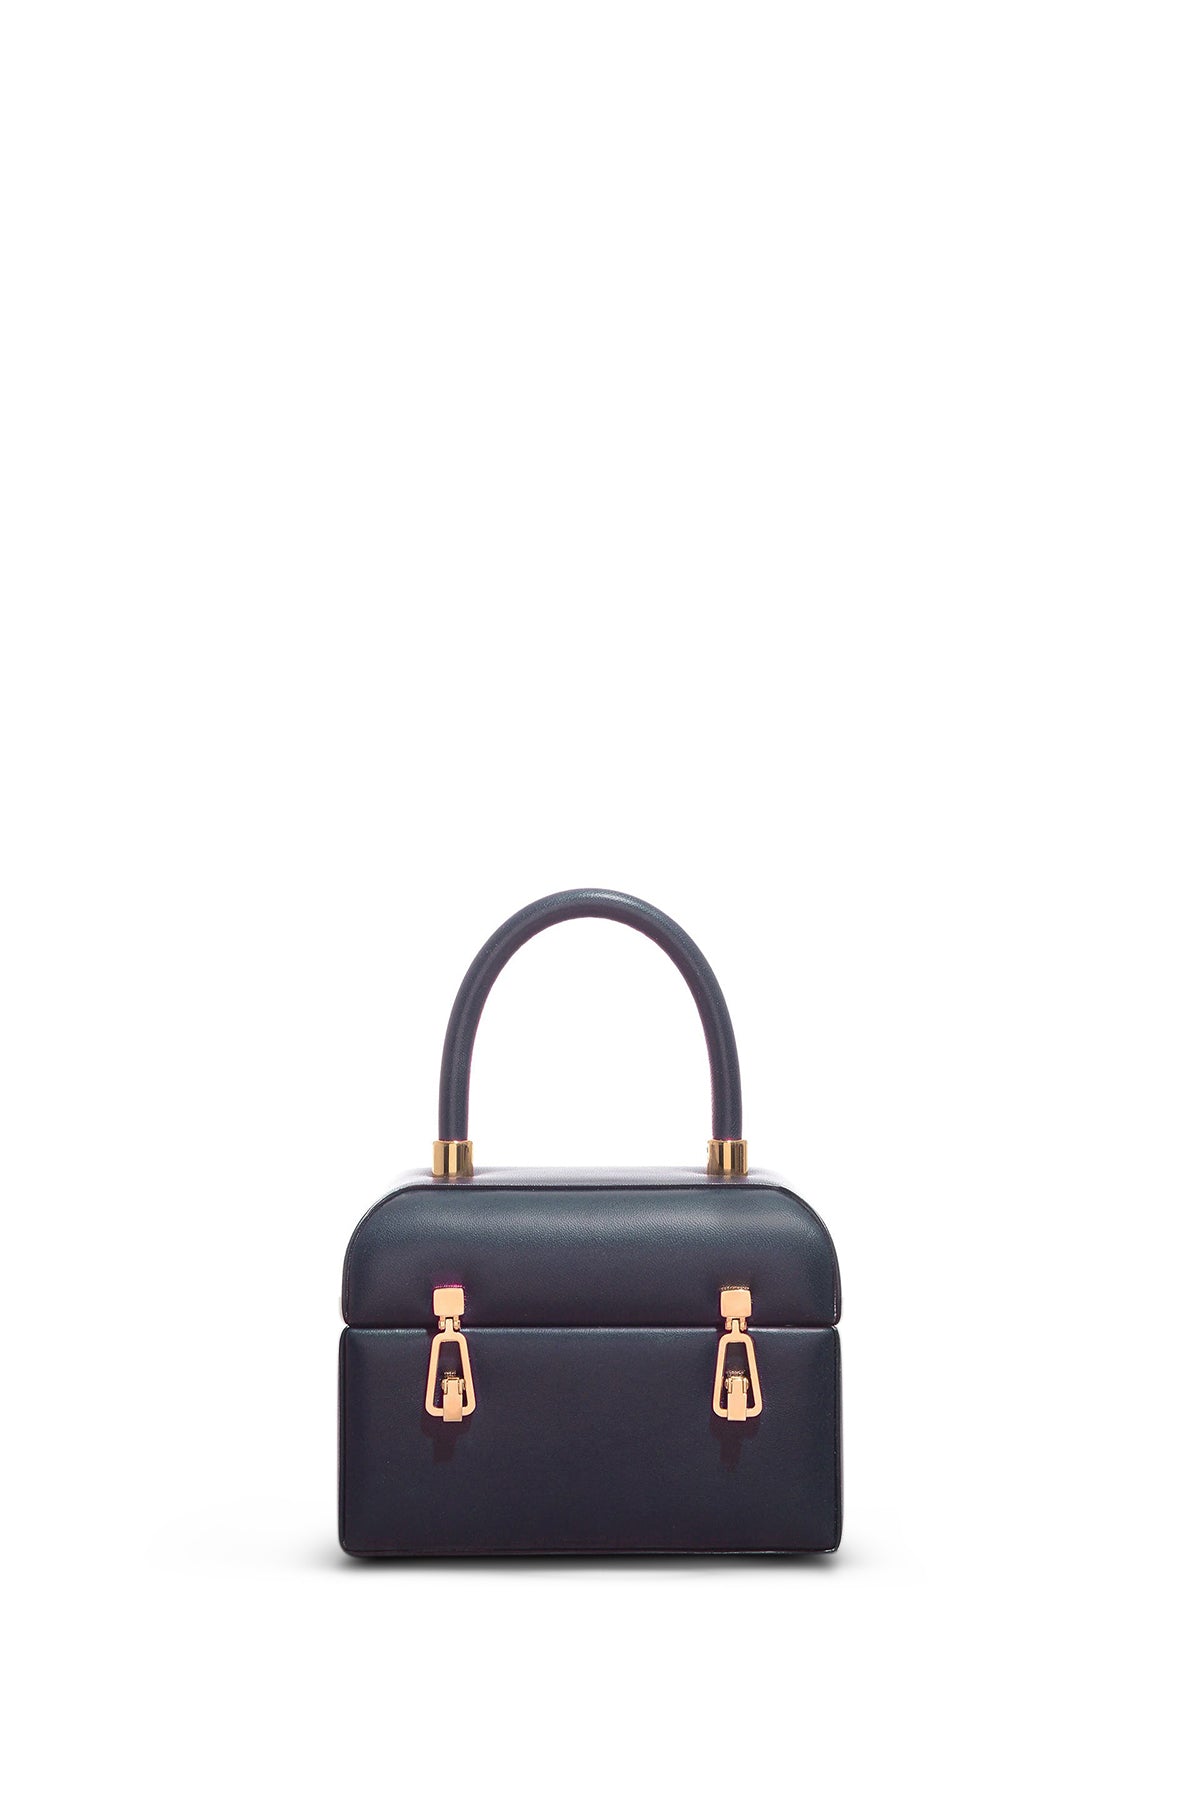 Patsy Bag in Navy Nappa Leather